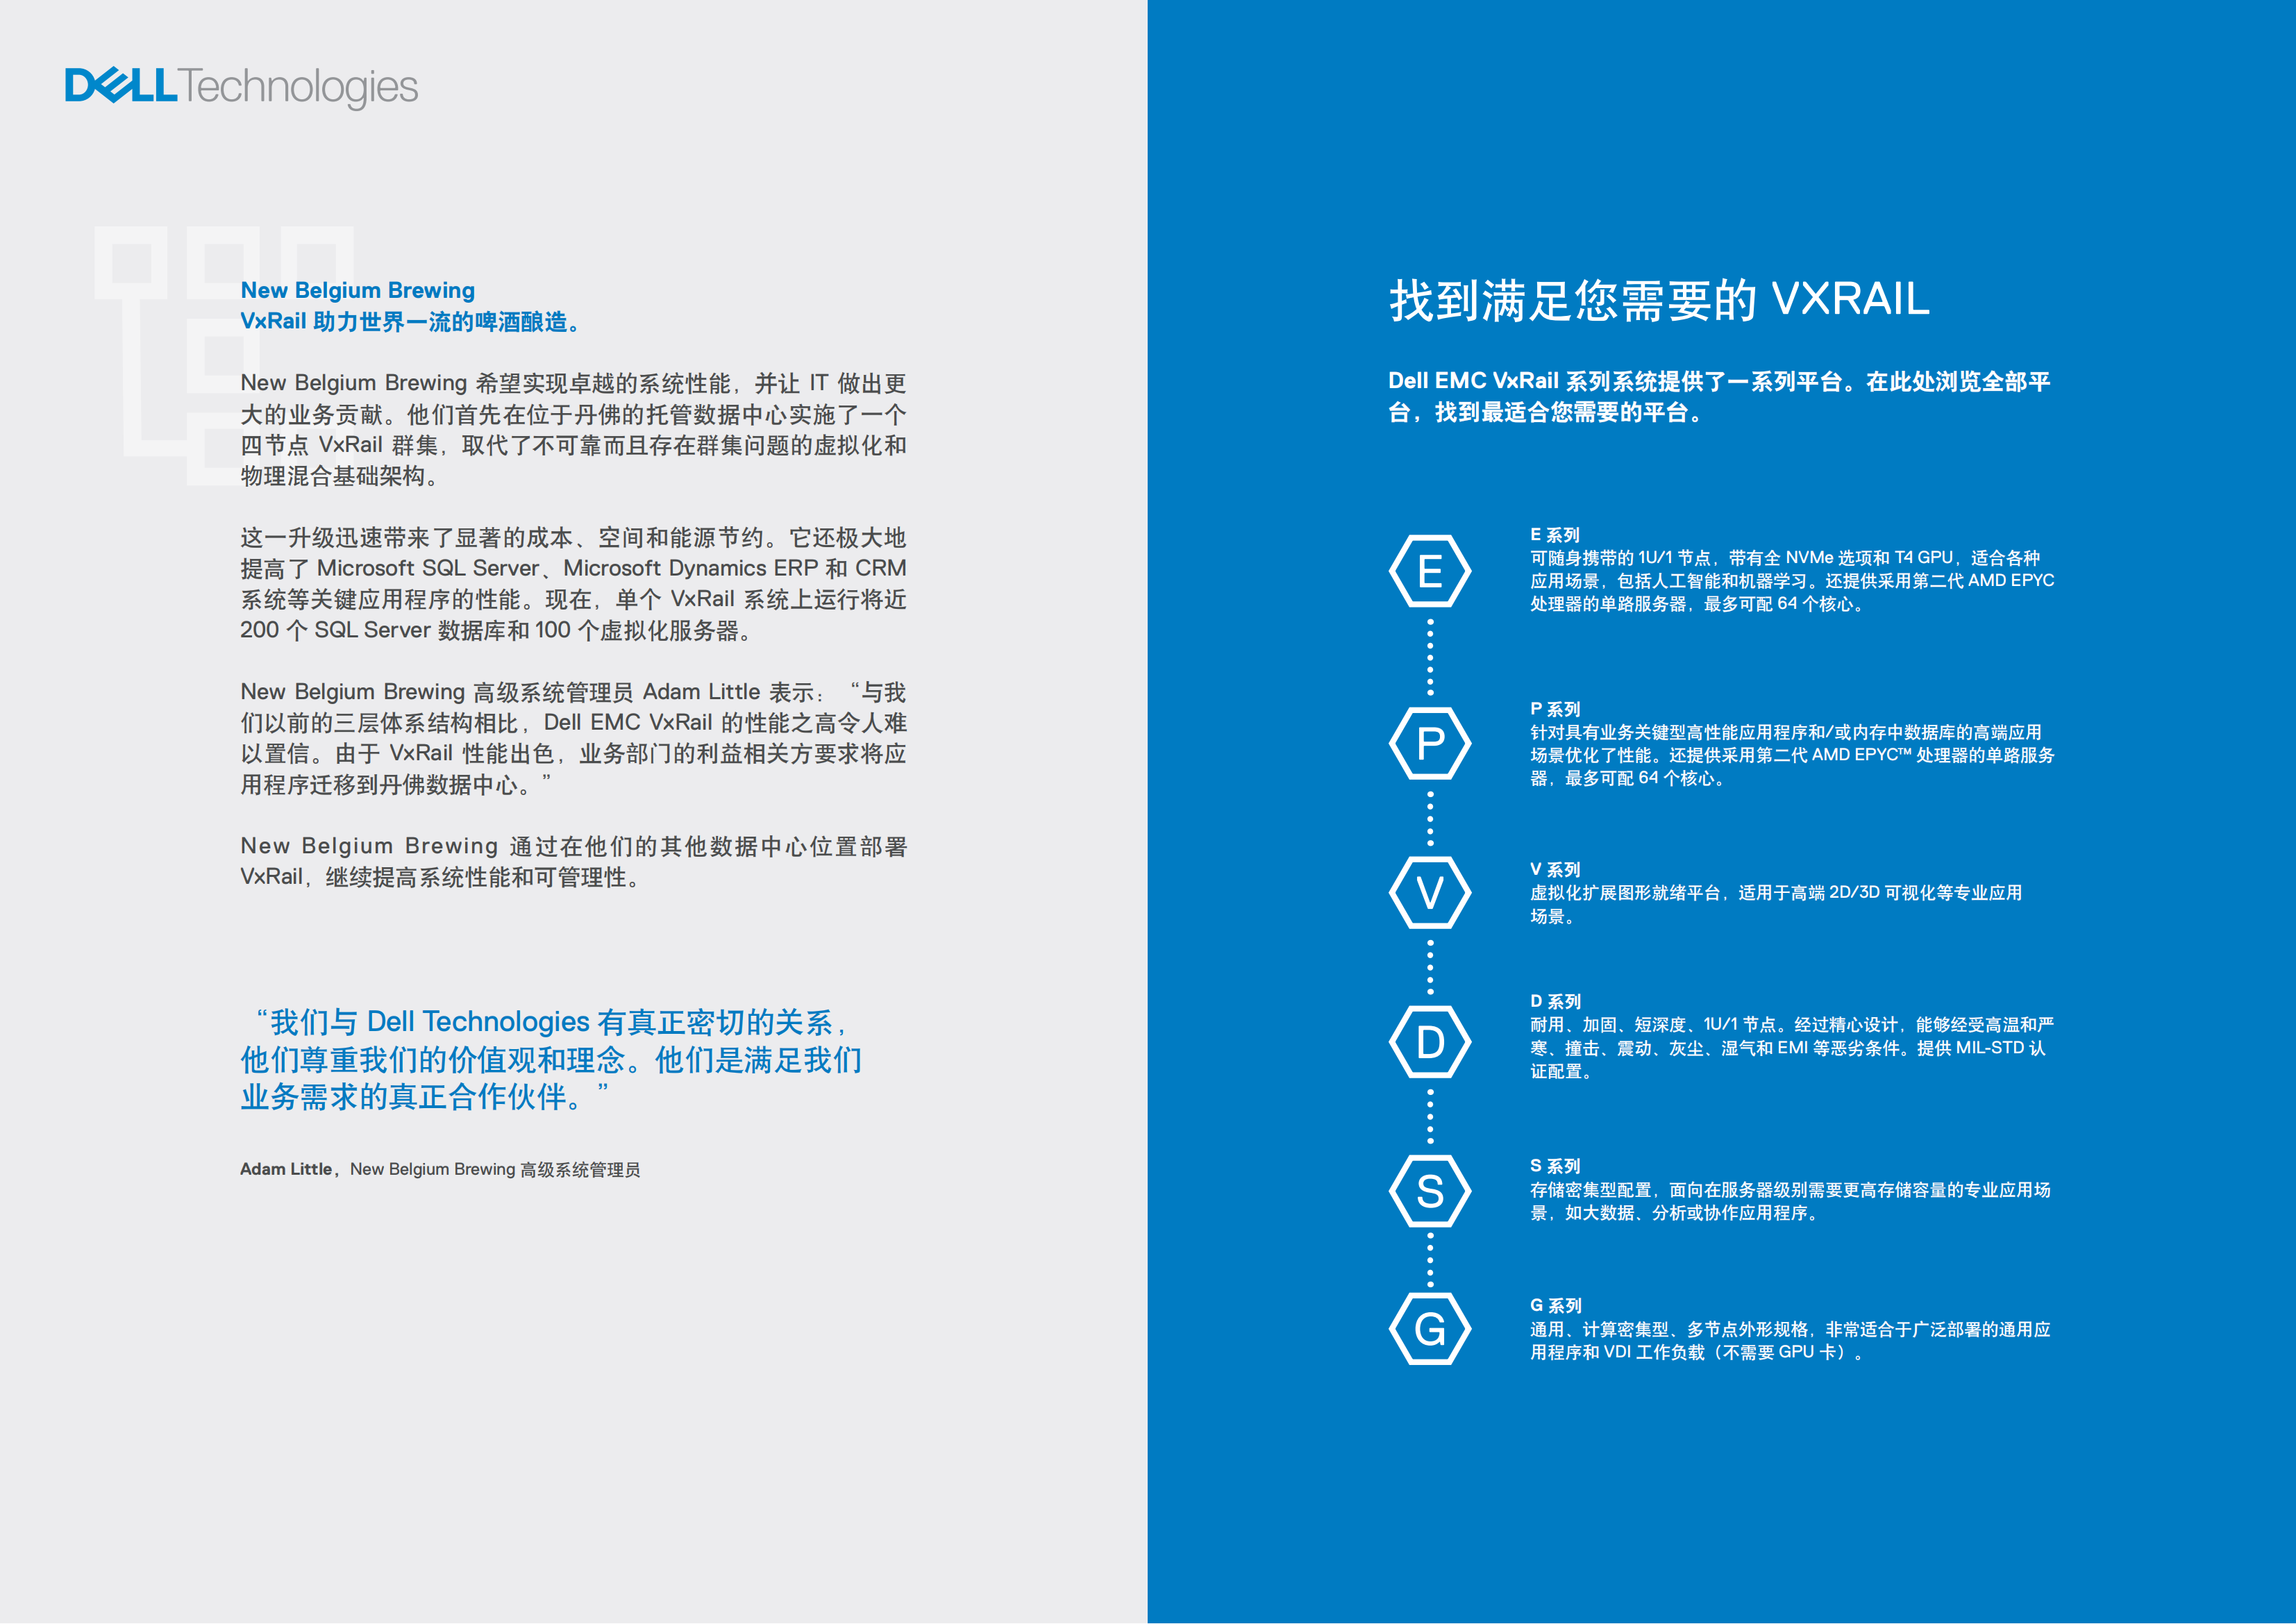 vxrail-customer-brochure-modernize-your-it-operations-with-dell-emc-vxrail(2)_12.png